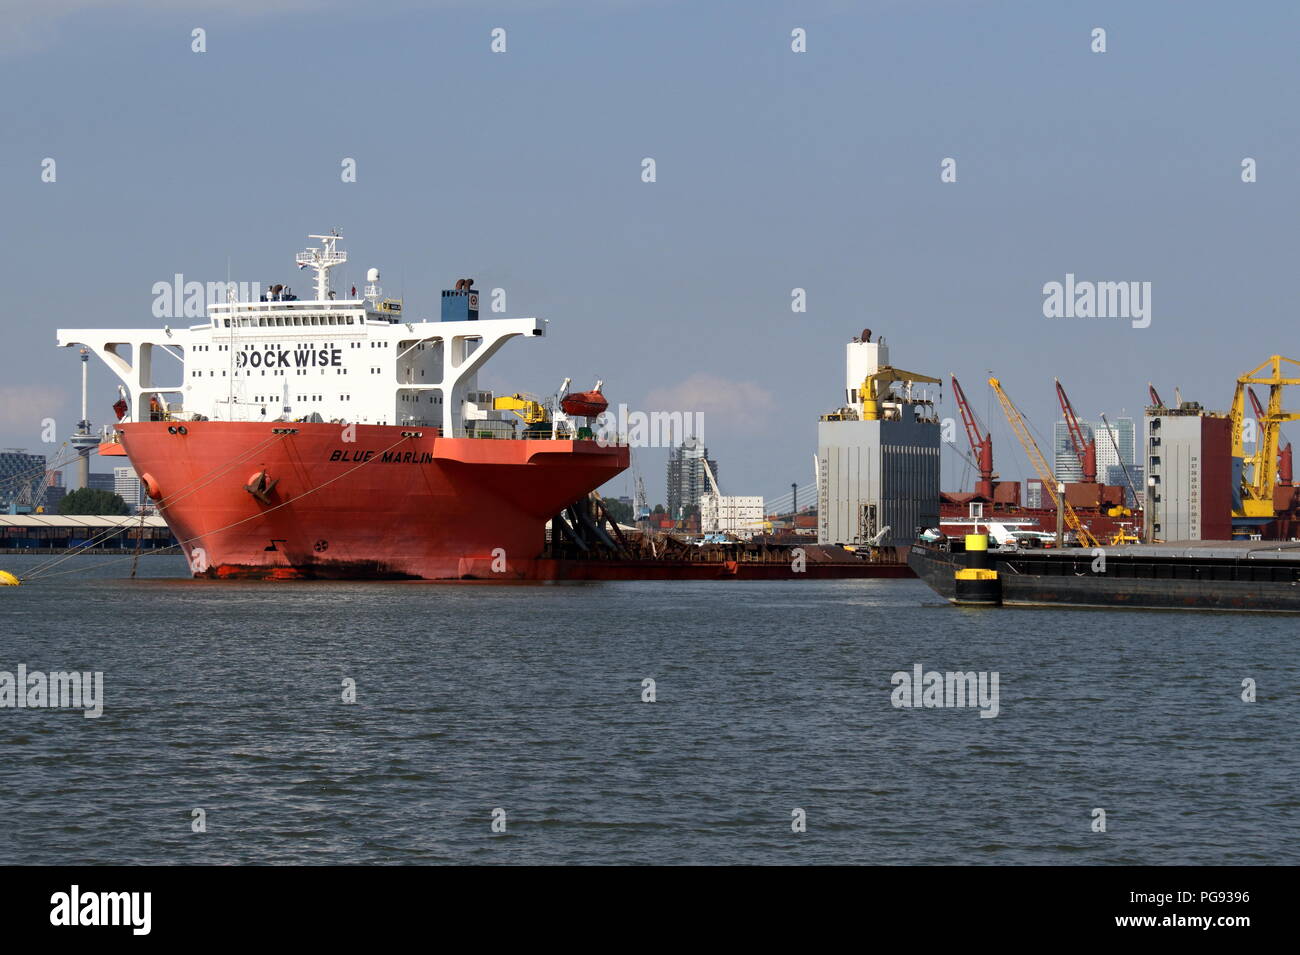 The heavy cargo vessel Blue Marlin is on July 13, 2018 in the Waalhaven of Rotterdam. Stock Photo